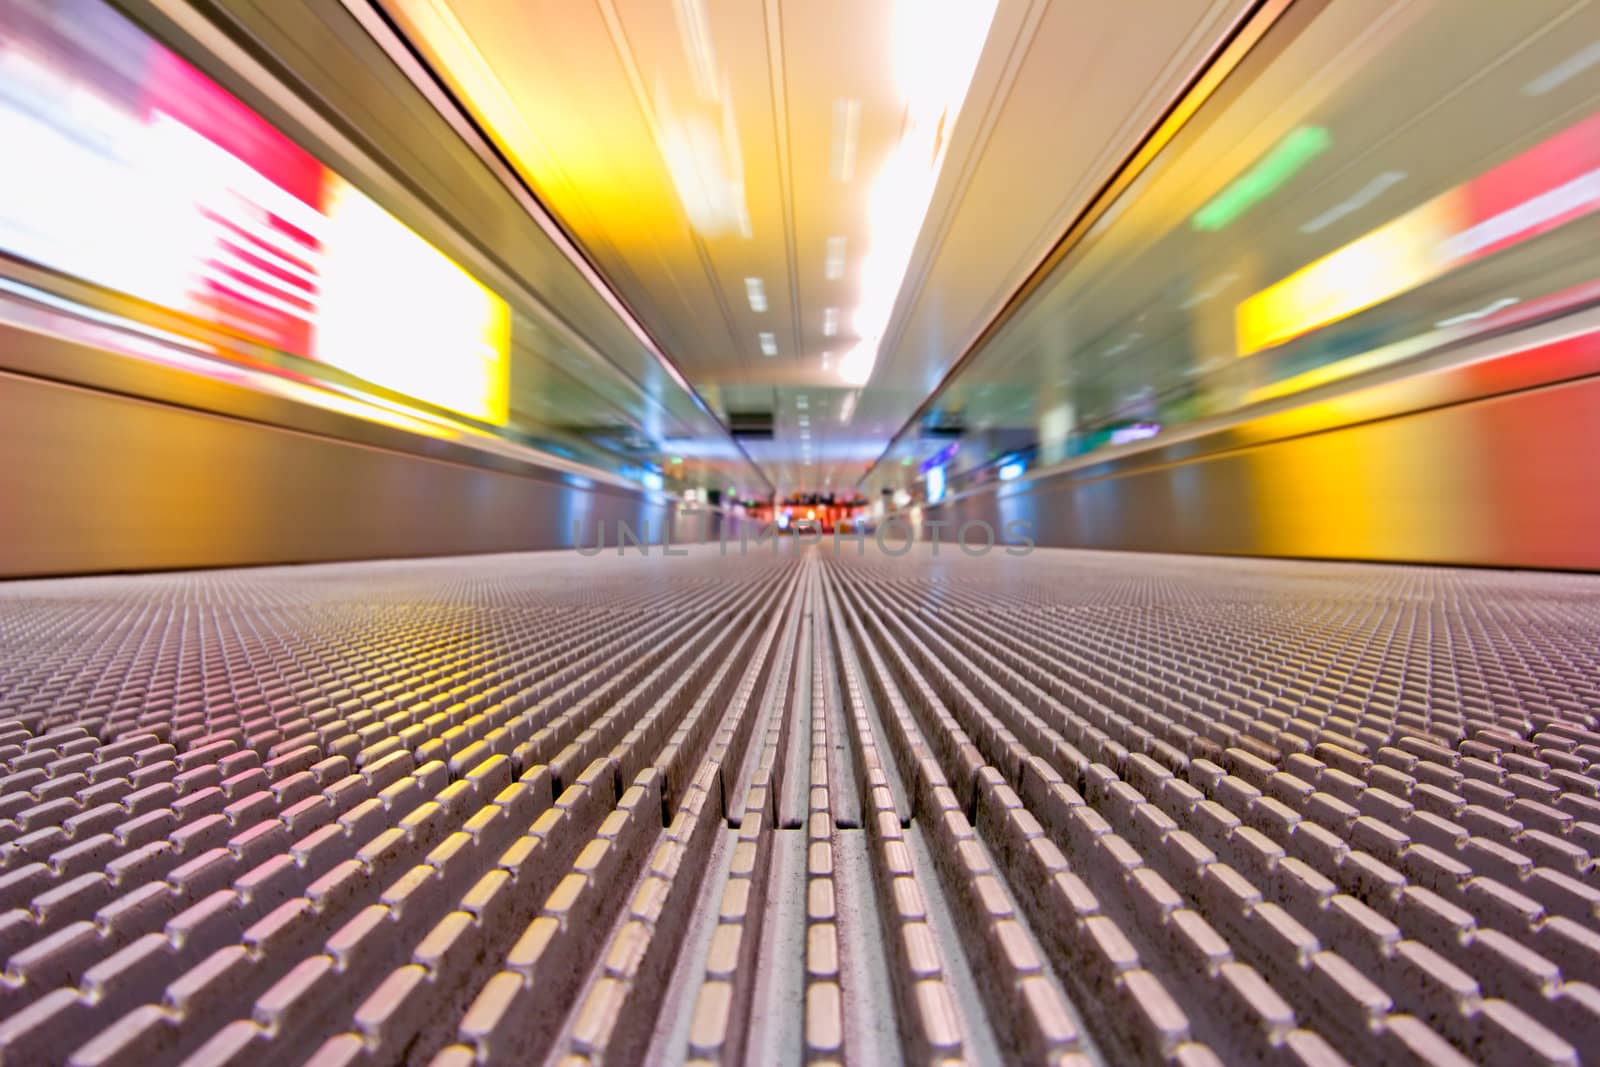 Photograph taken with a long shutter while traveling down an airport escalator